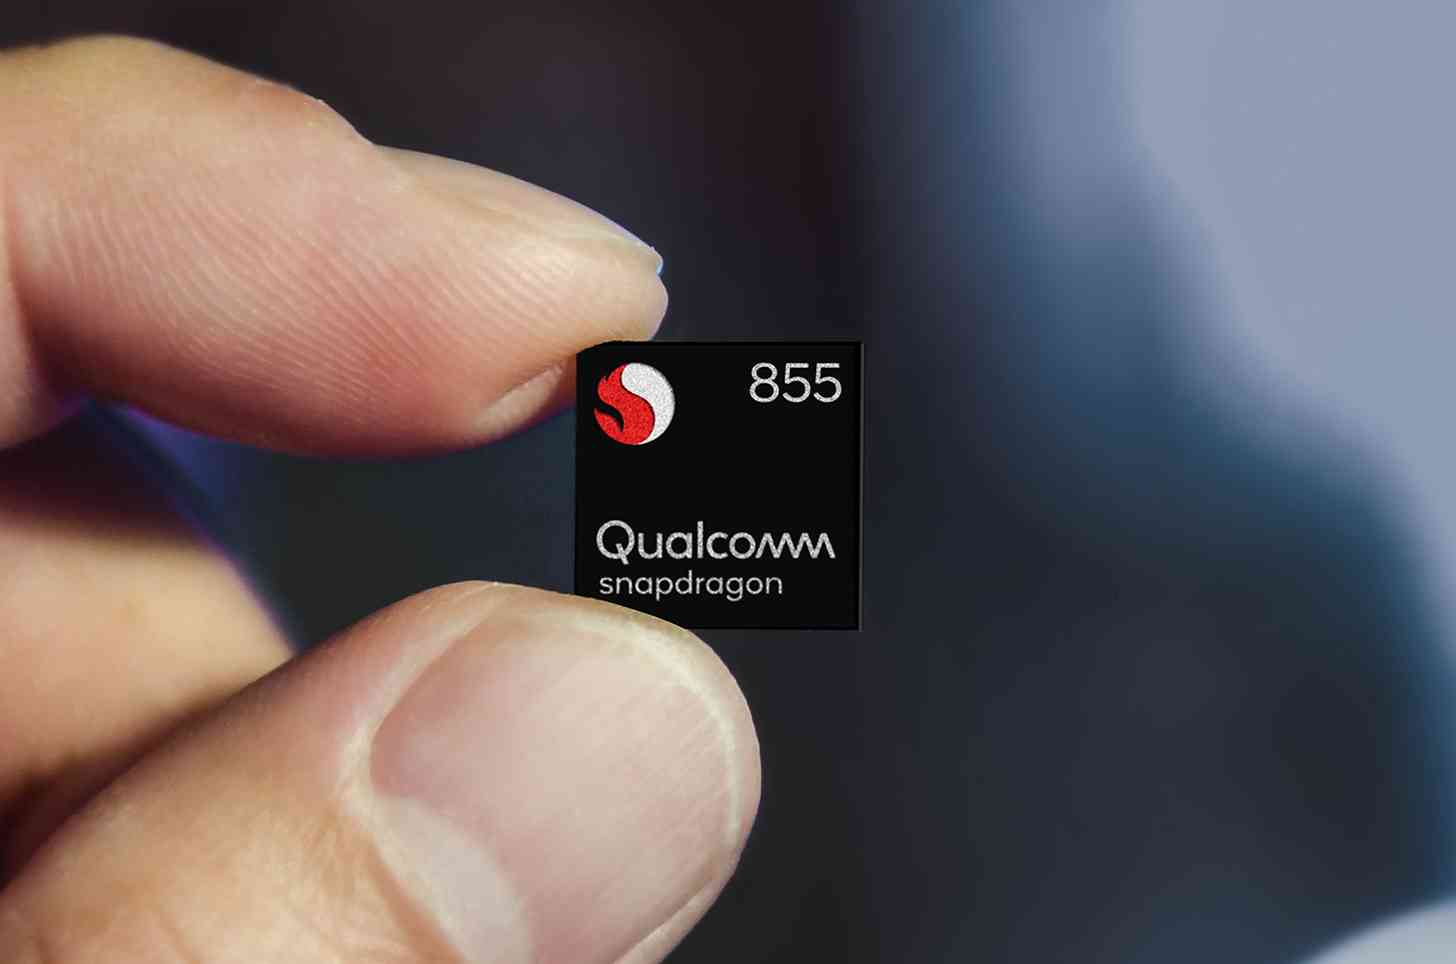 Snapdragon 855 official